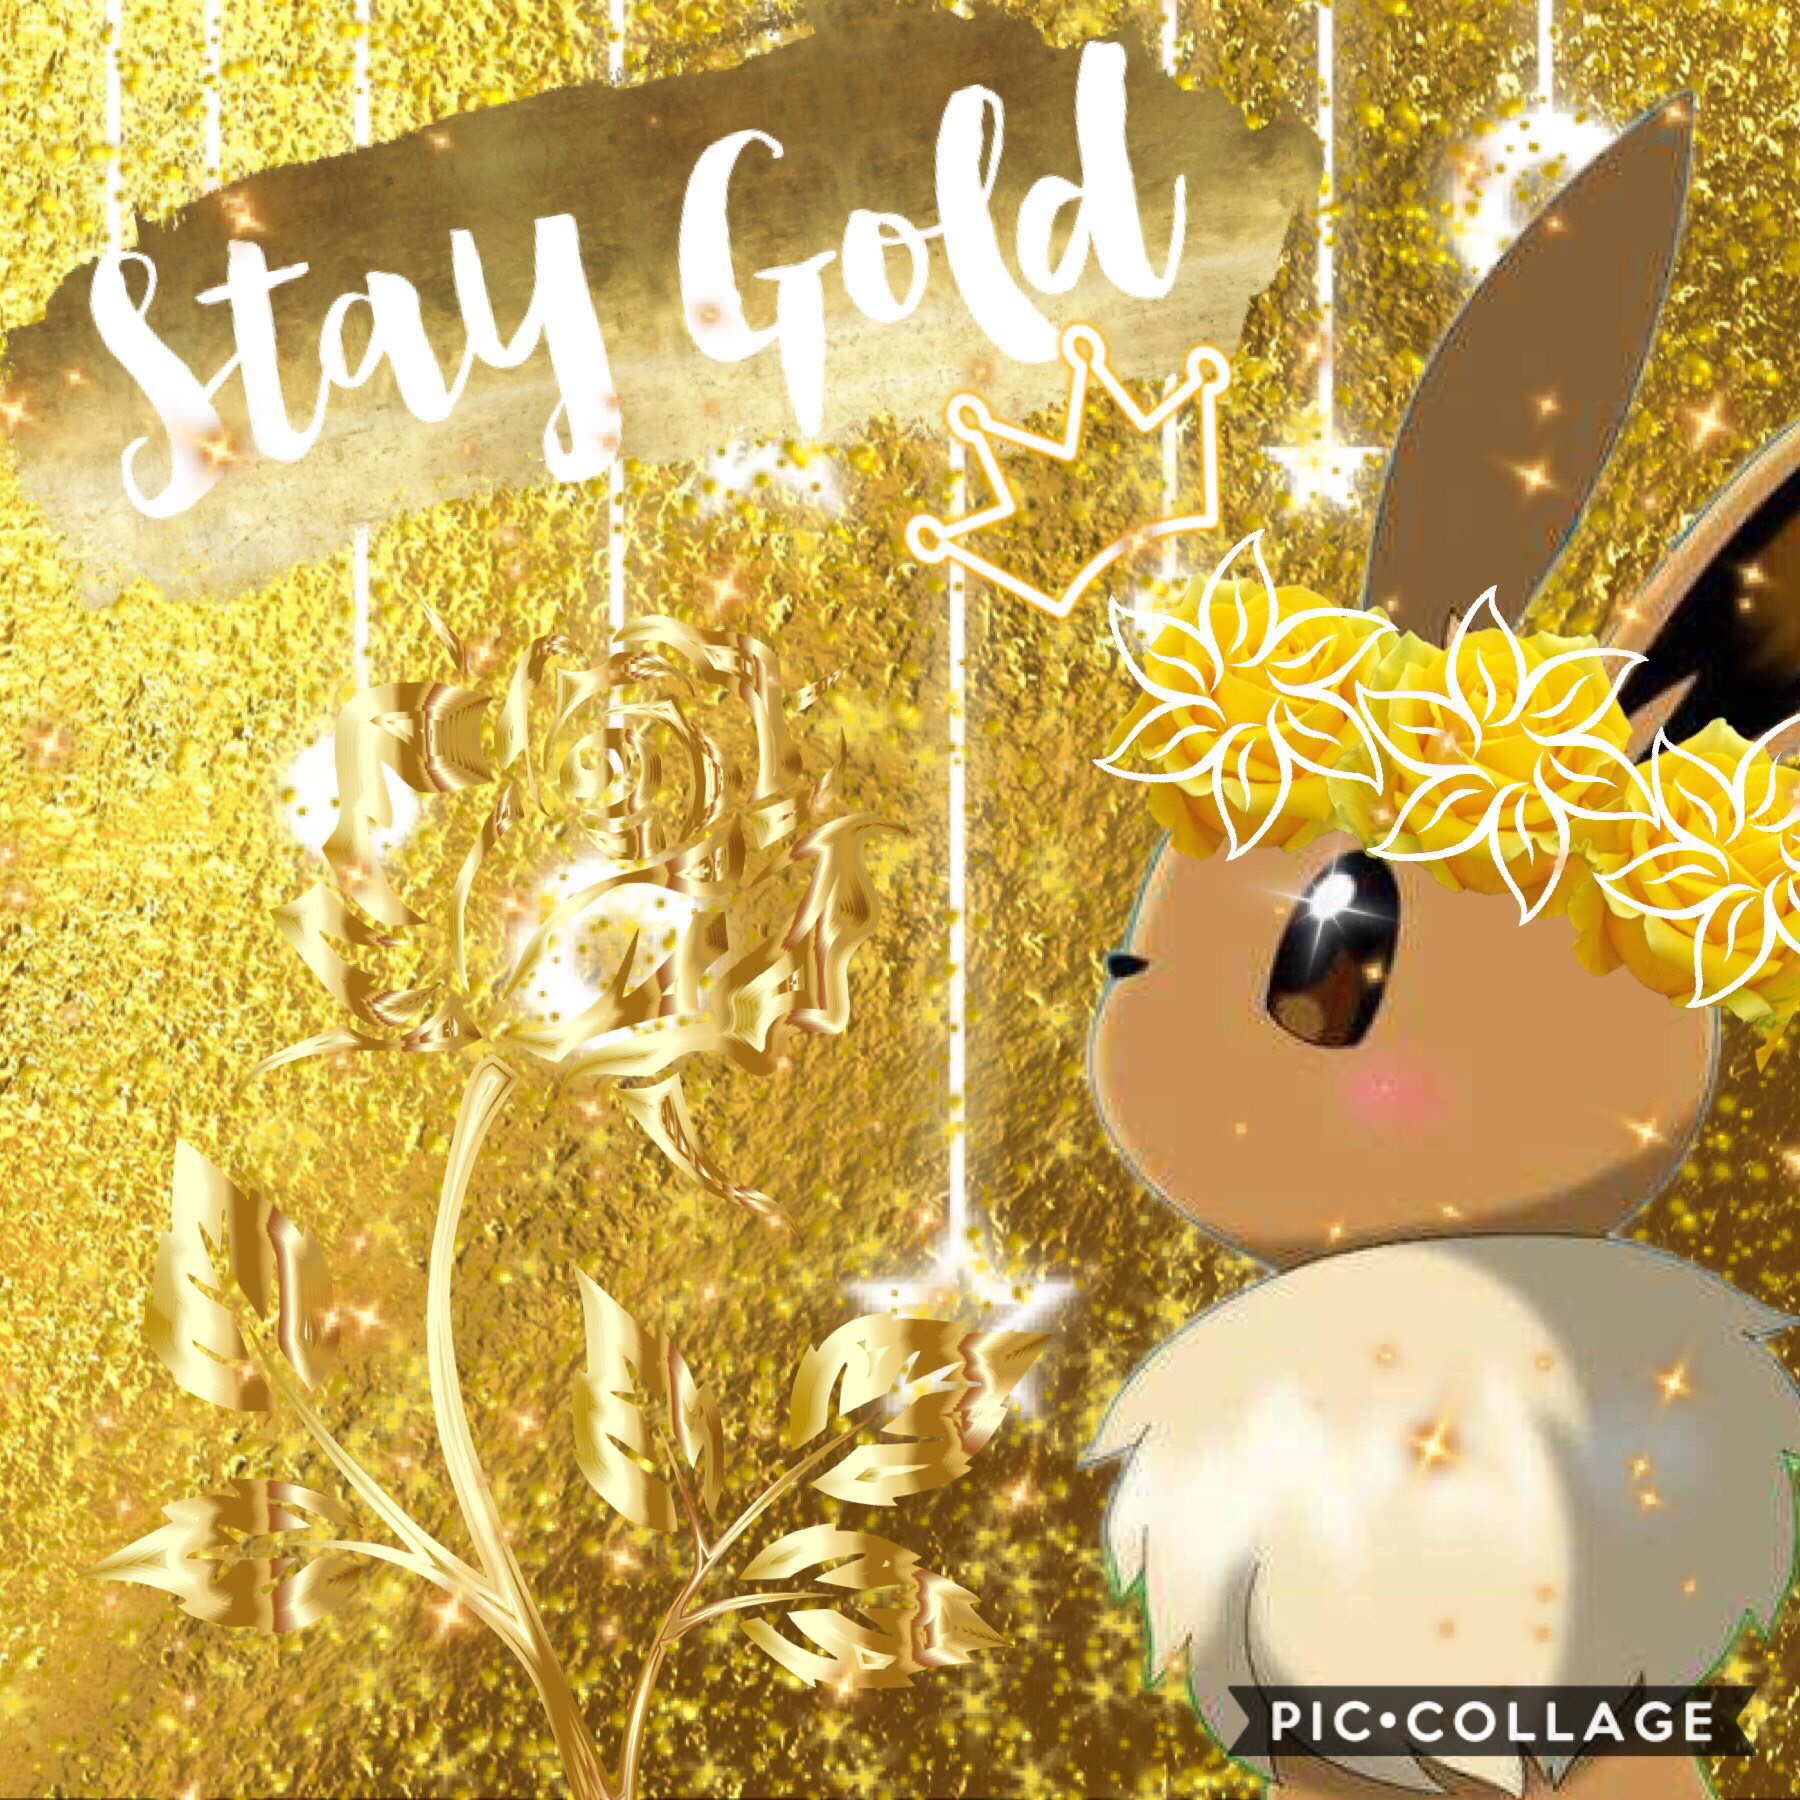 Stay gold~✨